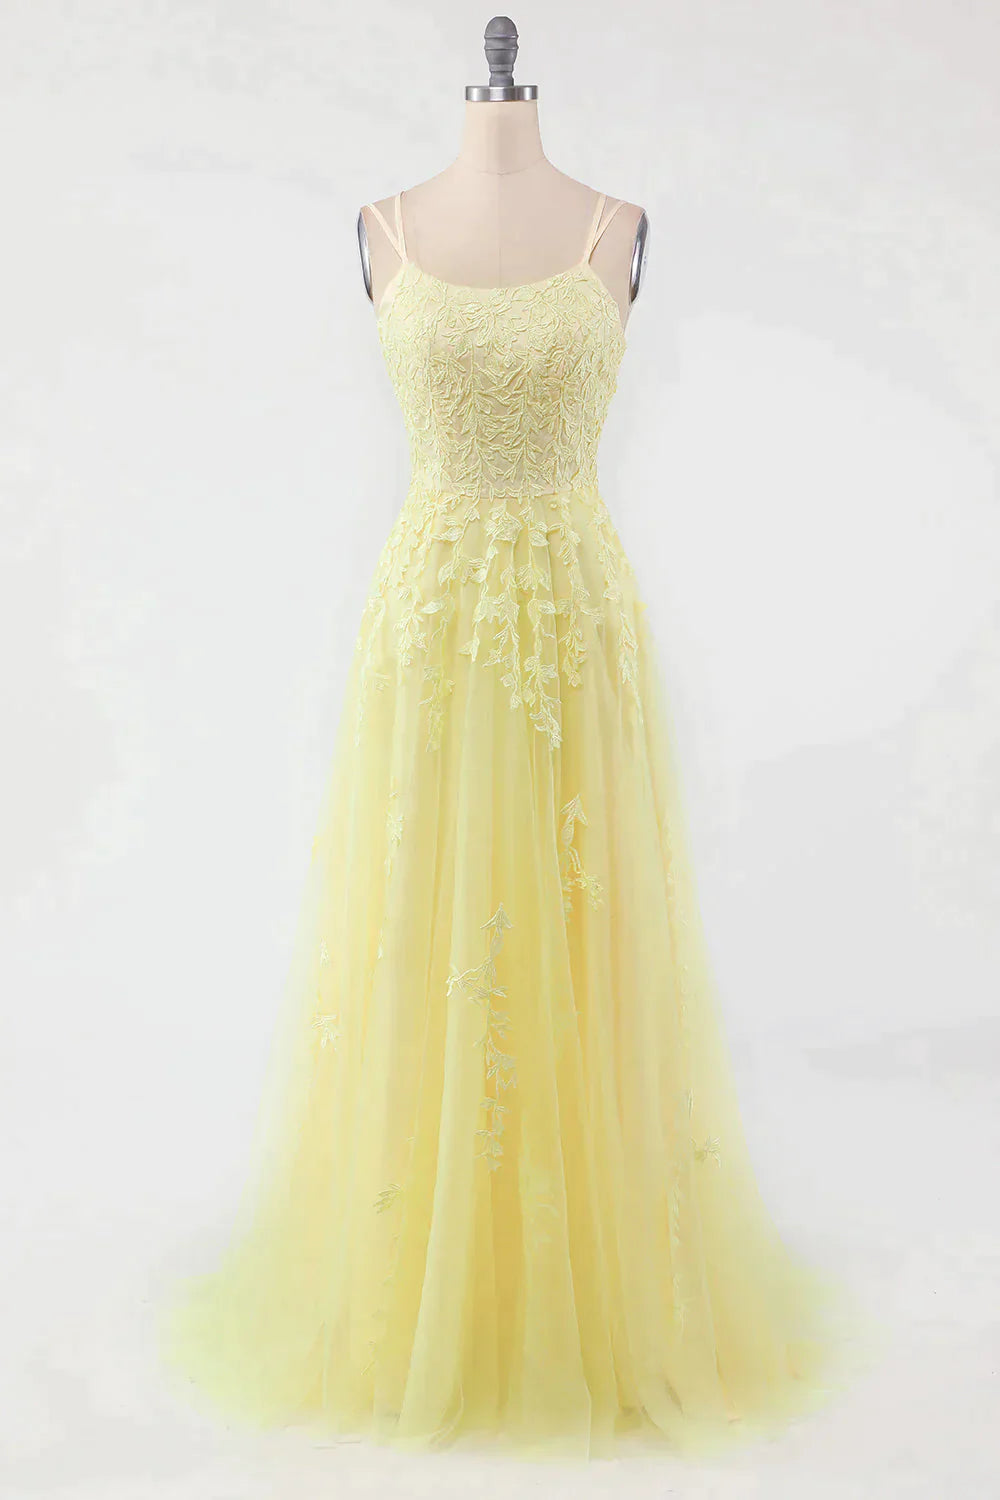 Functional Dress, A-Line Double Straps Lace Up Long Prom Dress With Appliques